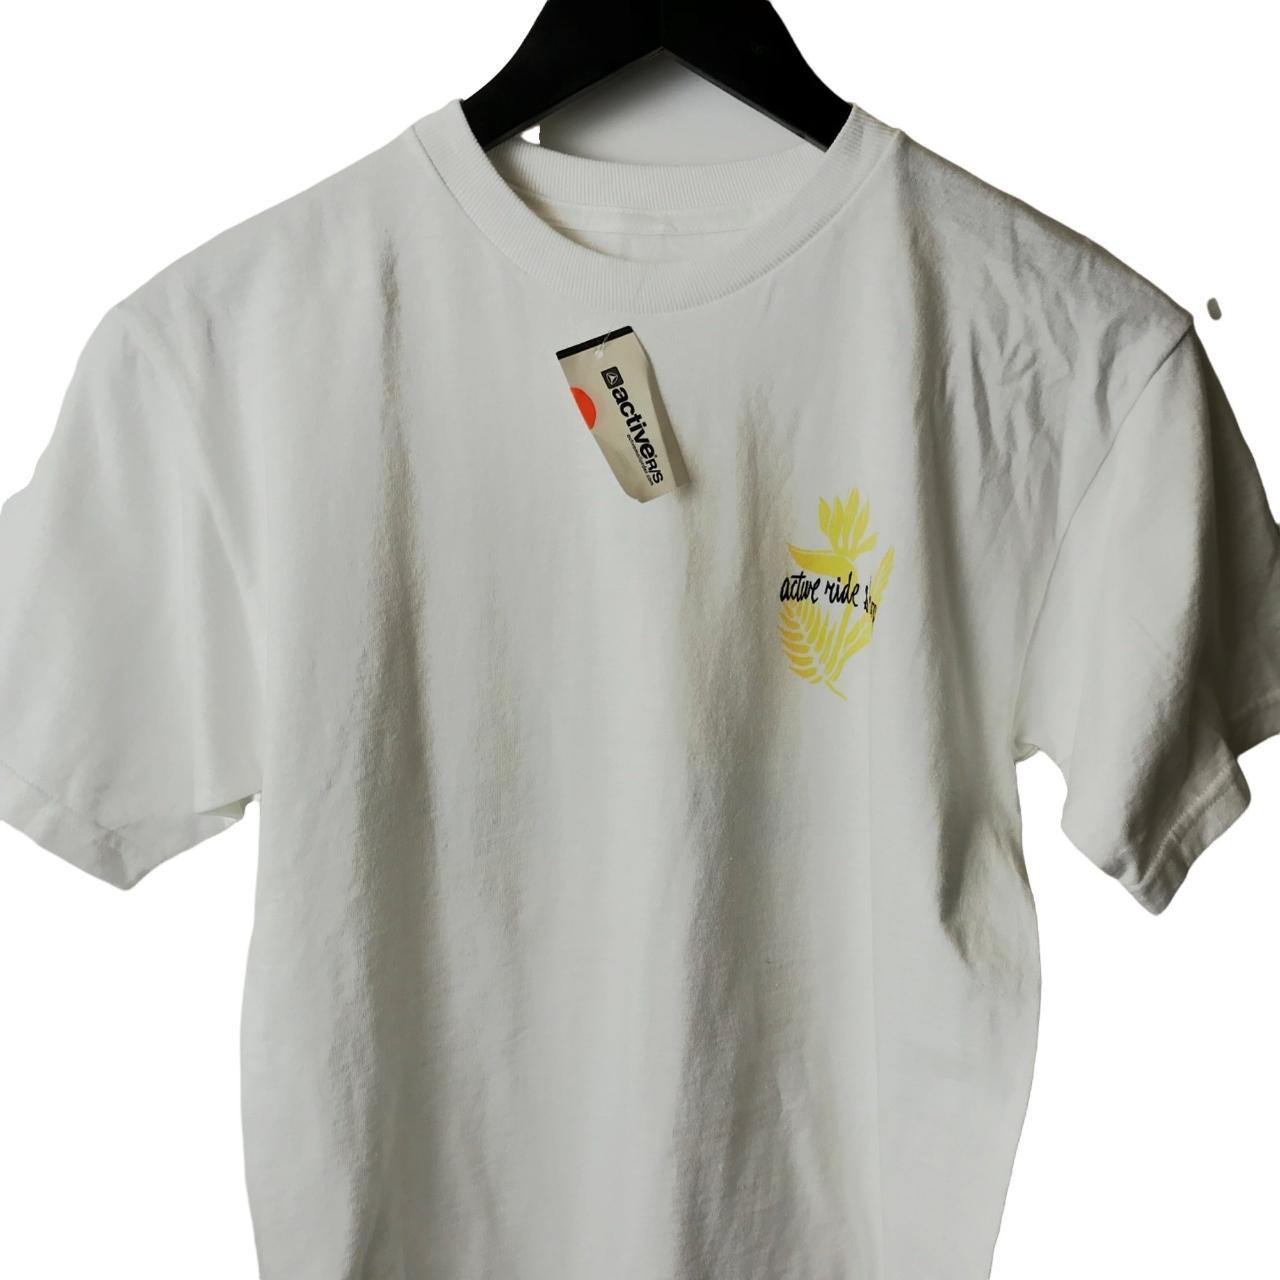 Product Image 1 - NWT Active Ride Shop T